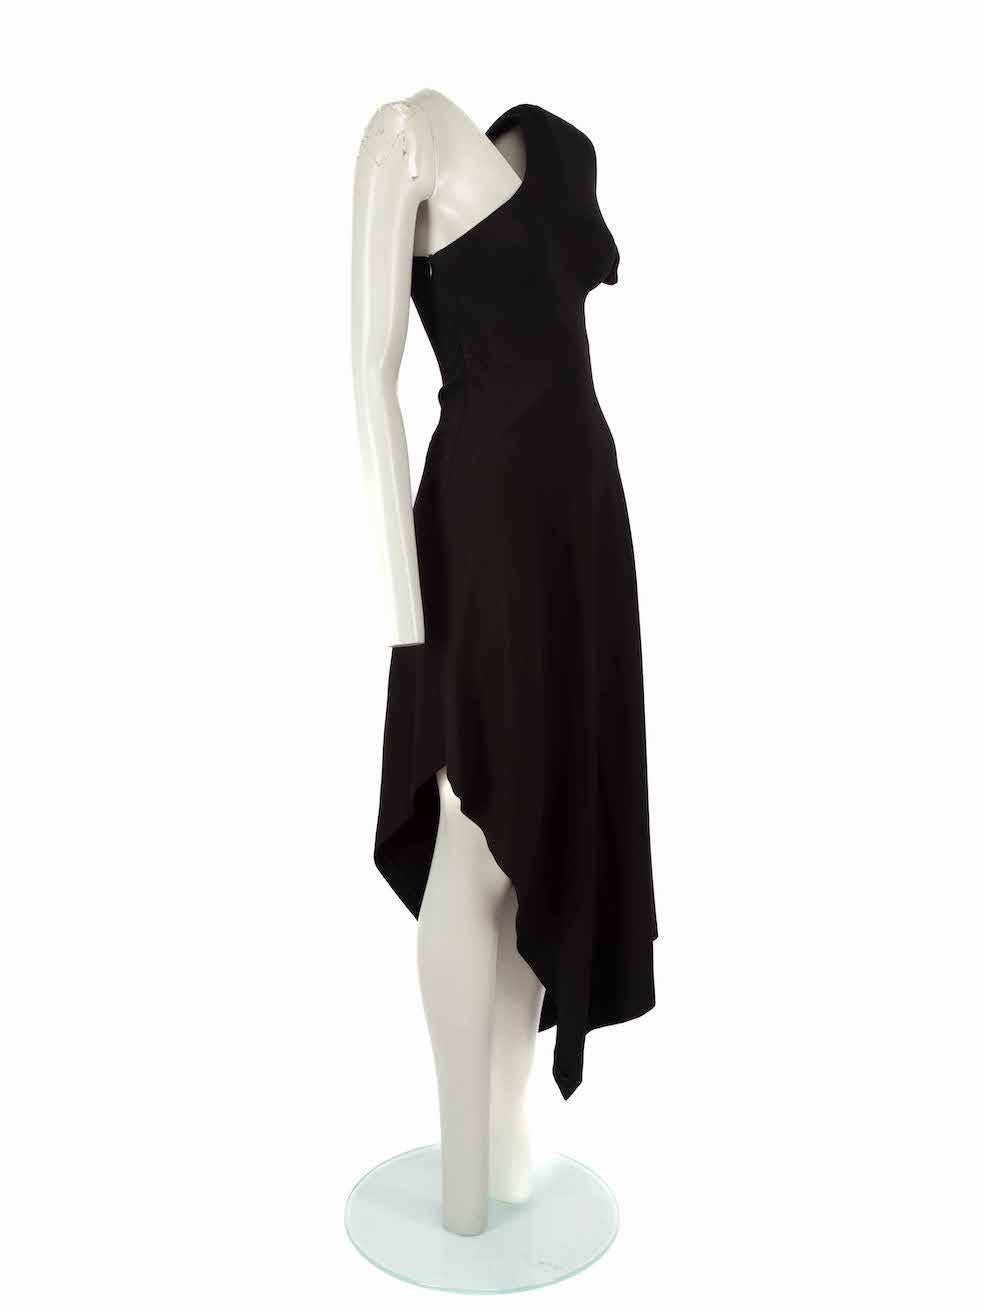 CONDITION is Very good. Hardly any visible wear to dress is evident on this used Rosetta Getty designer resale item.
 
Details
Black
Viscose
Asymmetric dress
Short sleeves
Maxi
Side cut out
Side zip fastening
 
Made in USA
 
Composition
96% Viscose,